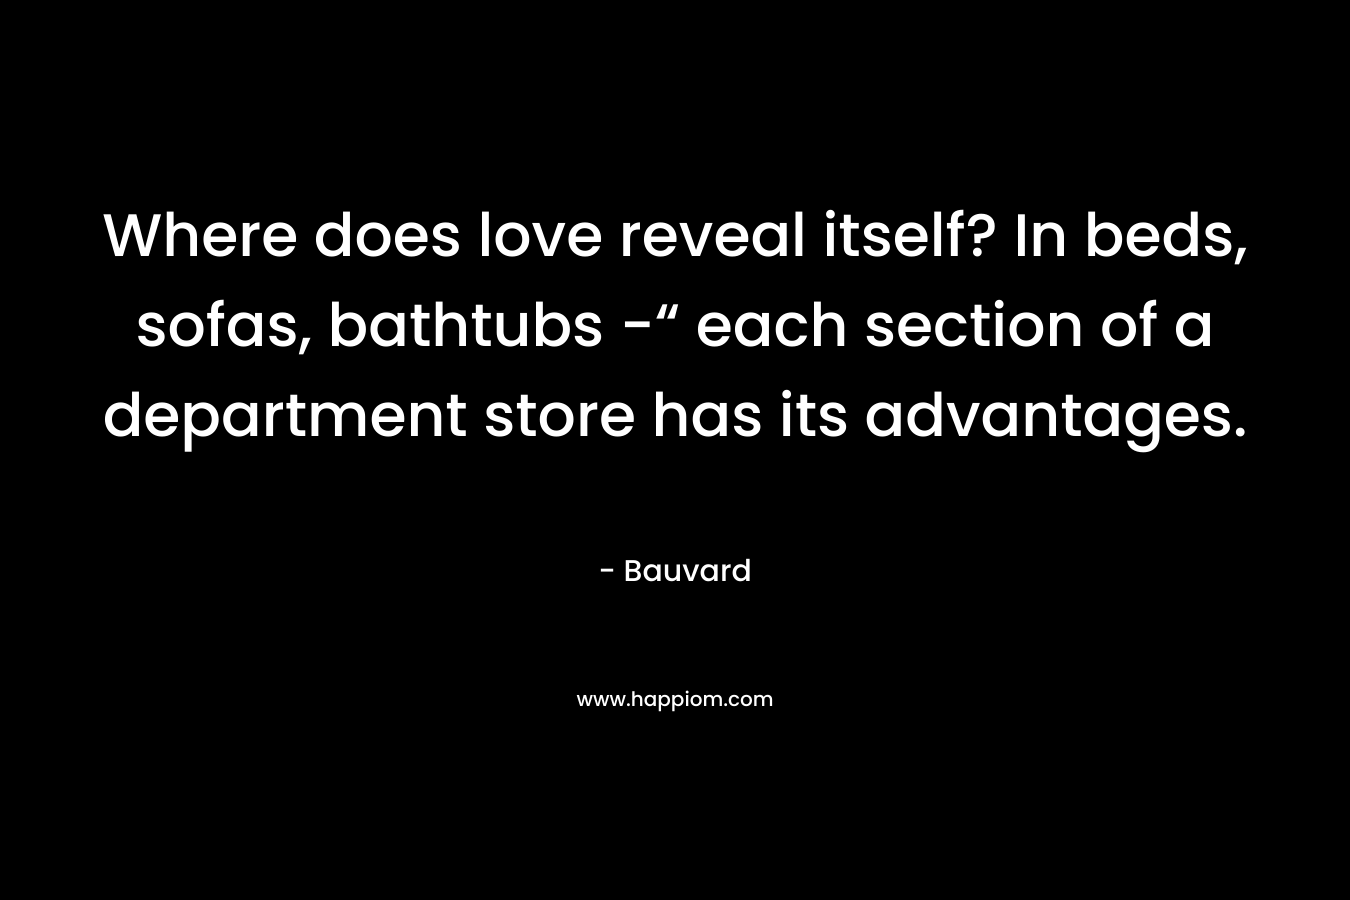 Where does love reveal itself? In beds, sofas, bathtubs -“ each section of a department store has its advantages.